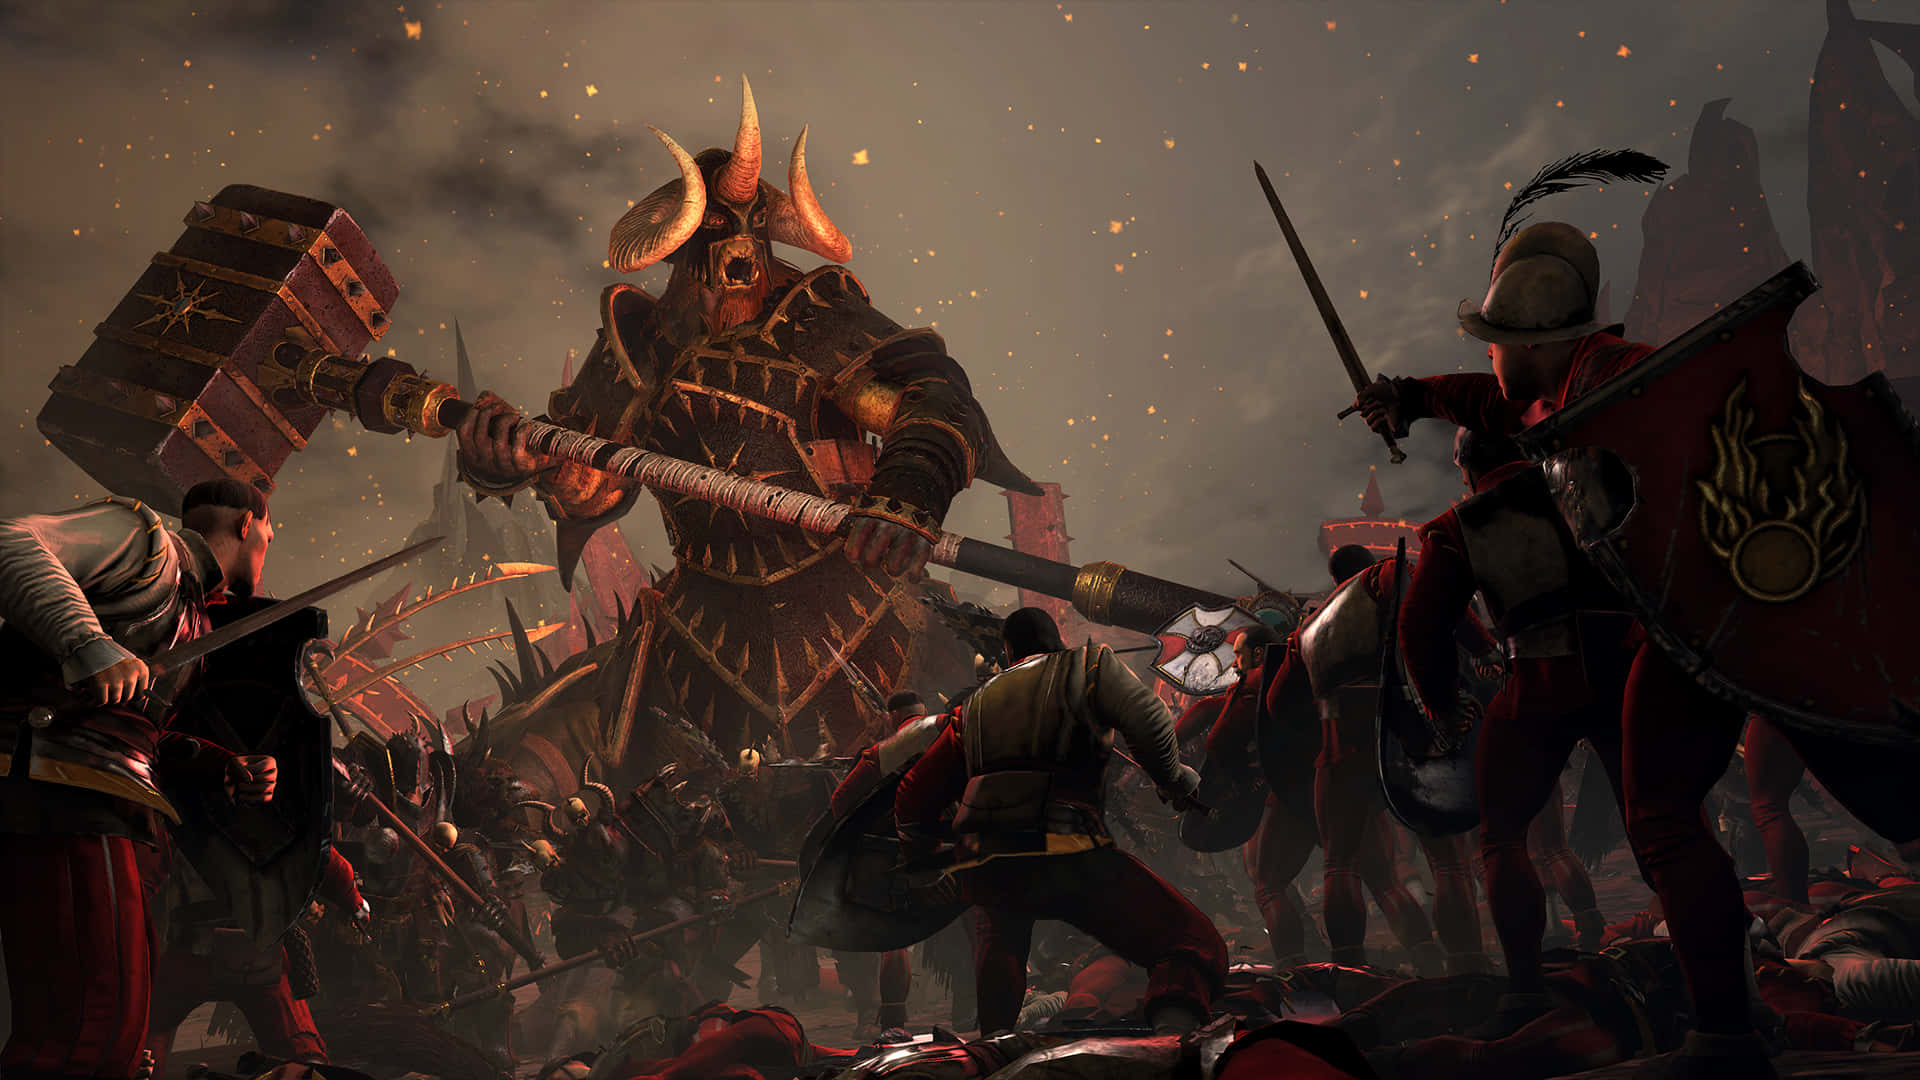 Challenge yourself with a world of strategic unrest: Total War Warhammer